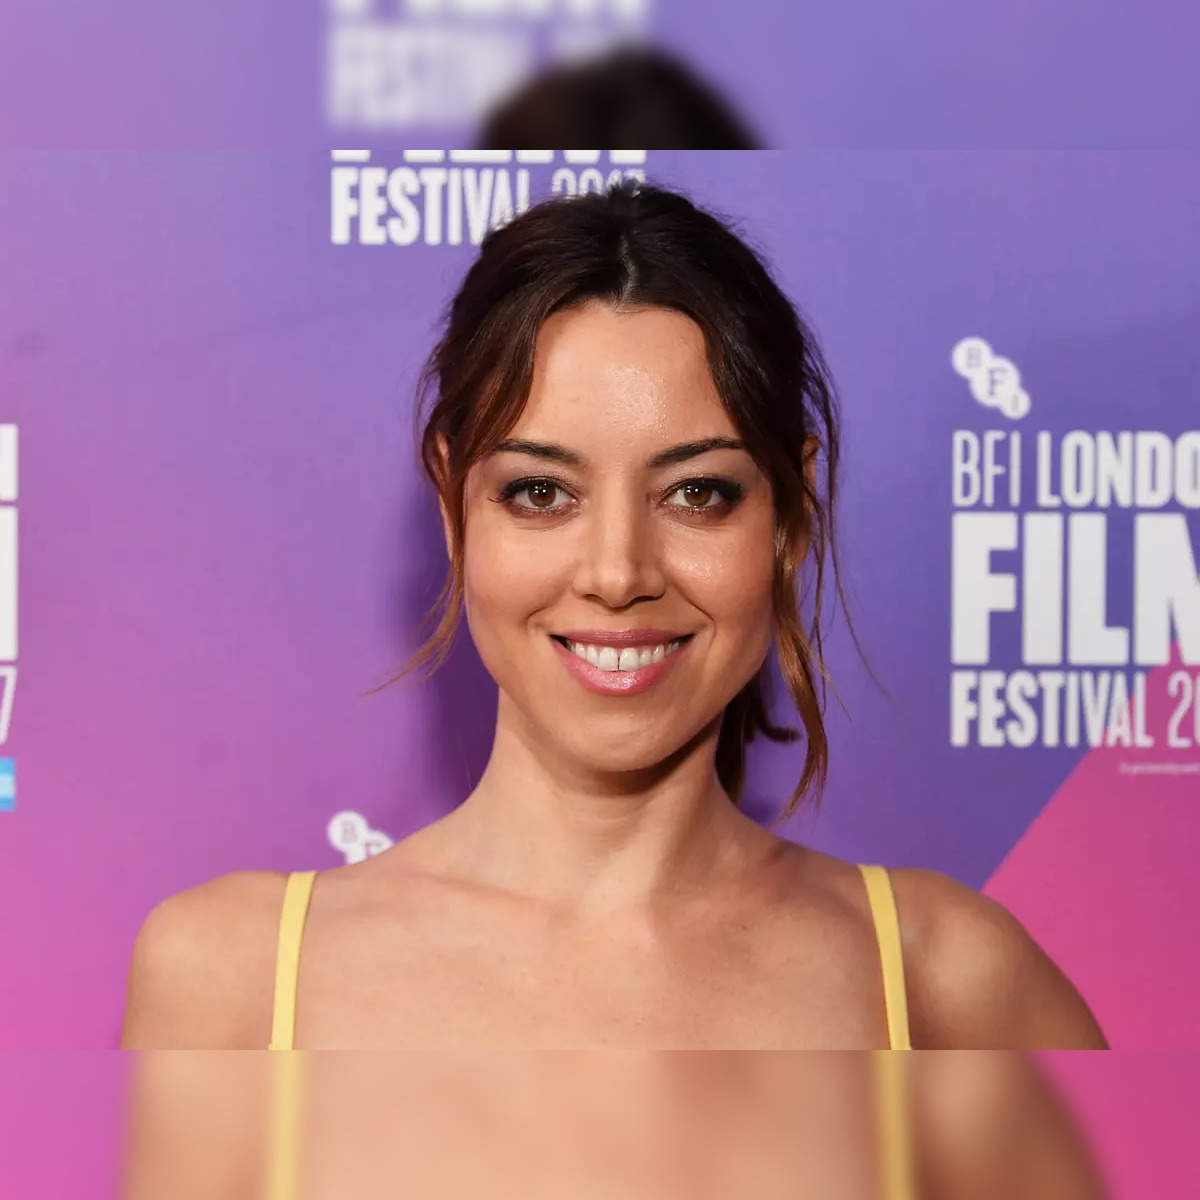 aubrey plaza attends the premiere of 'the white lotus' season 2 in